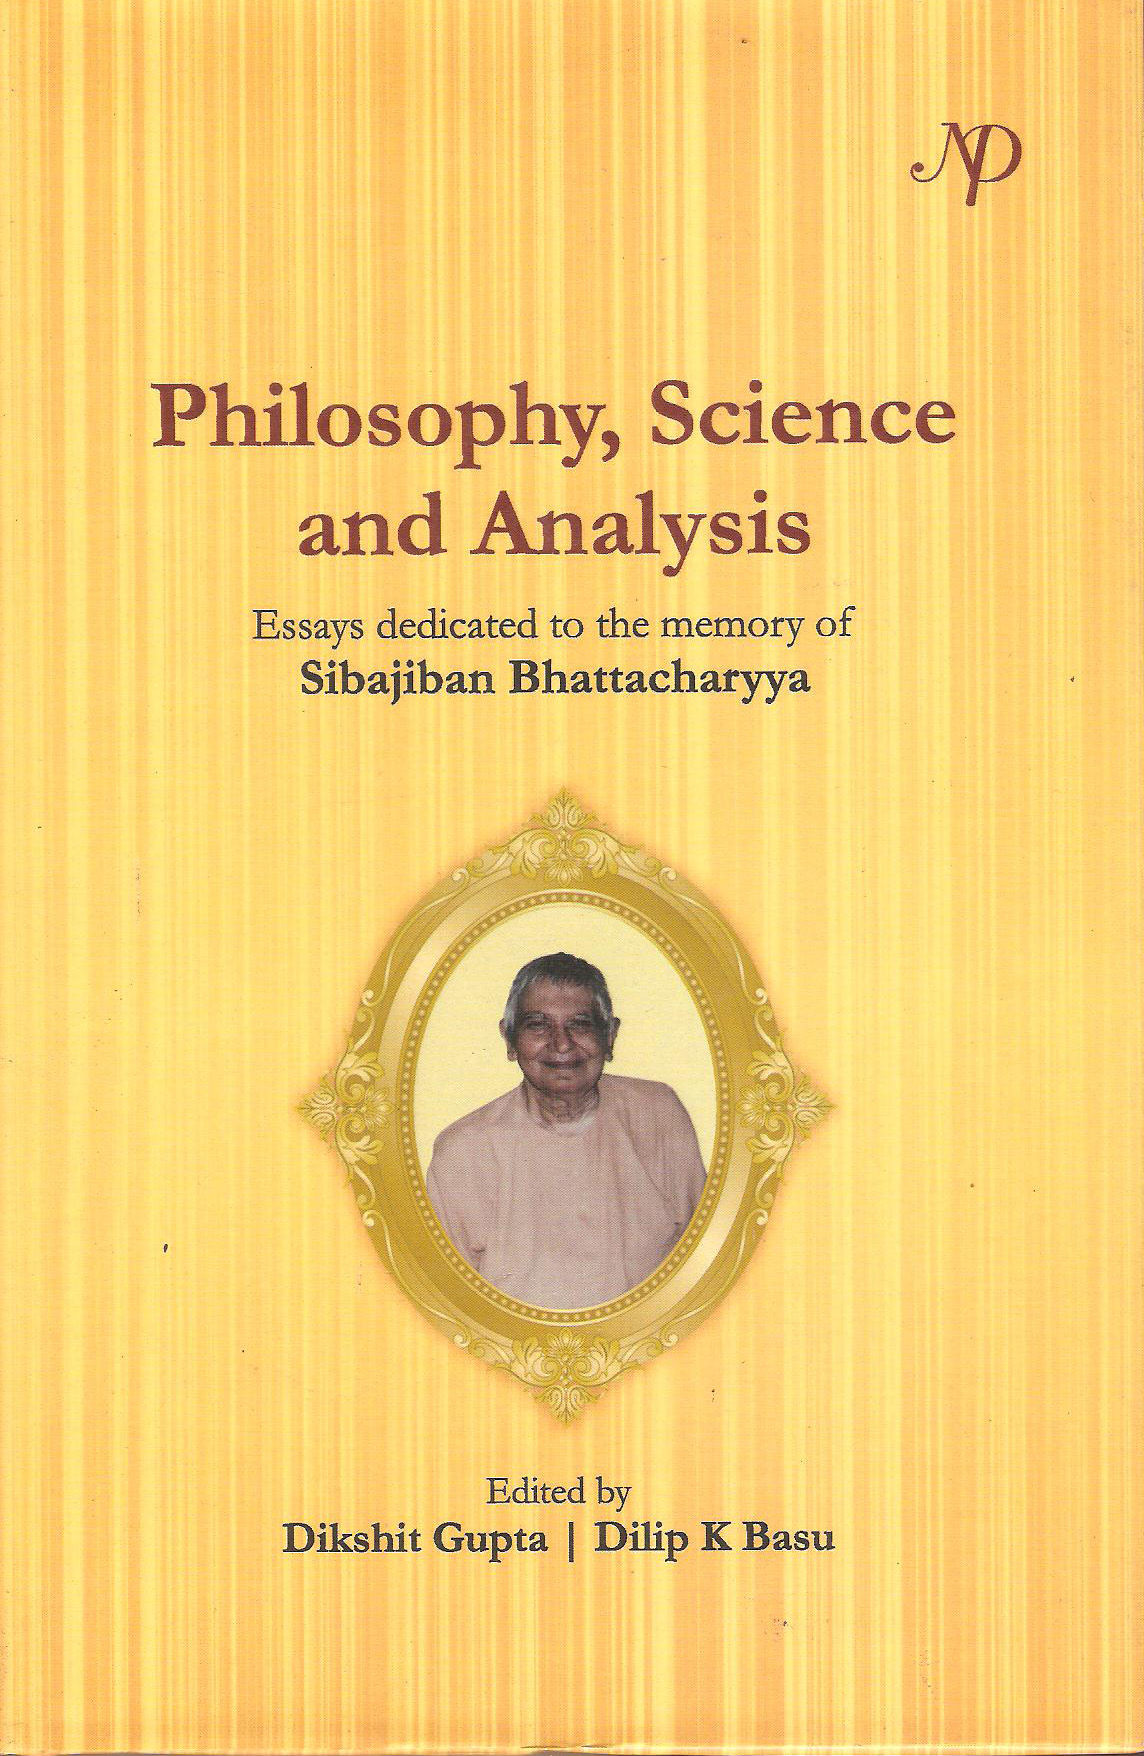 Philosophy, Science and Analysis